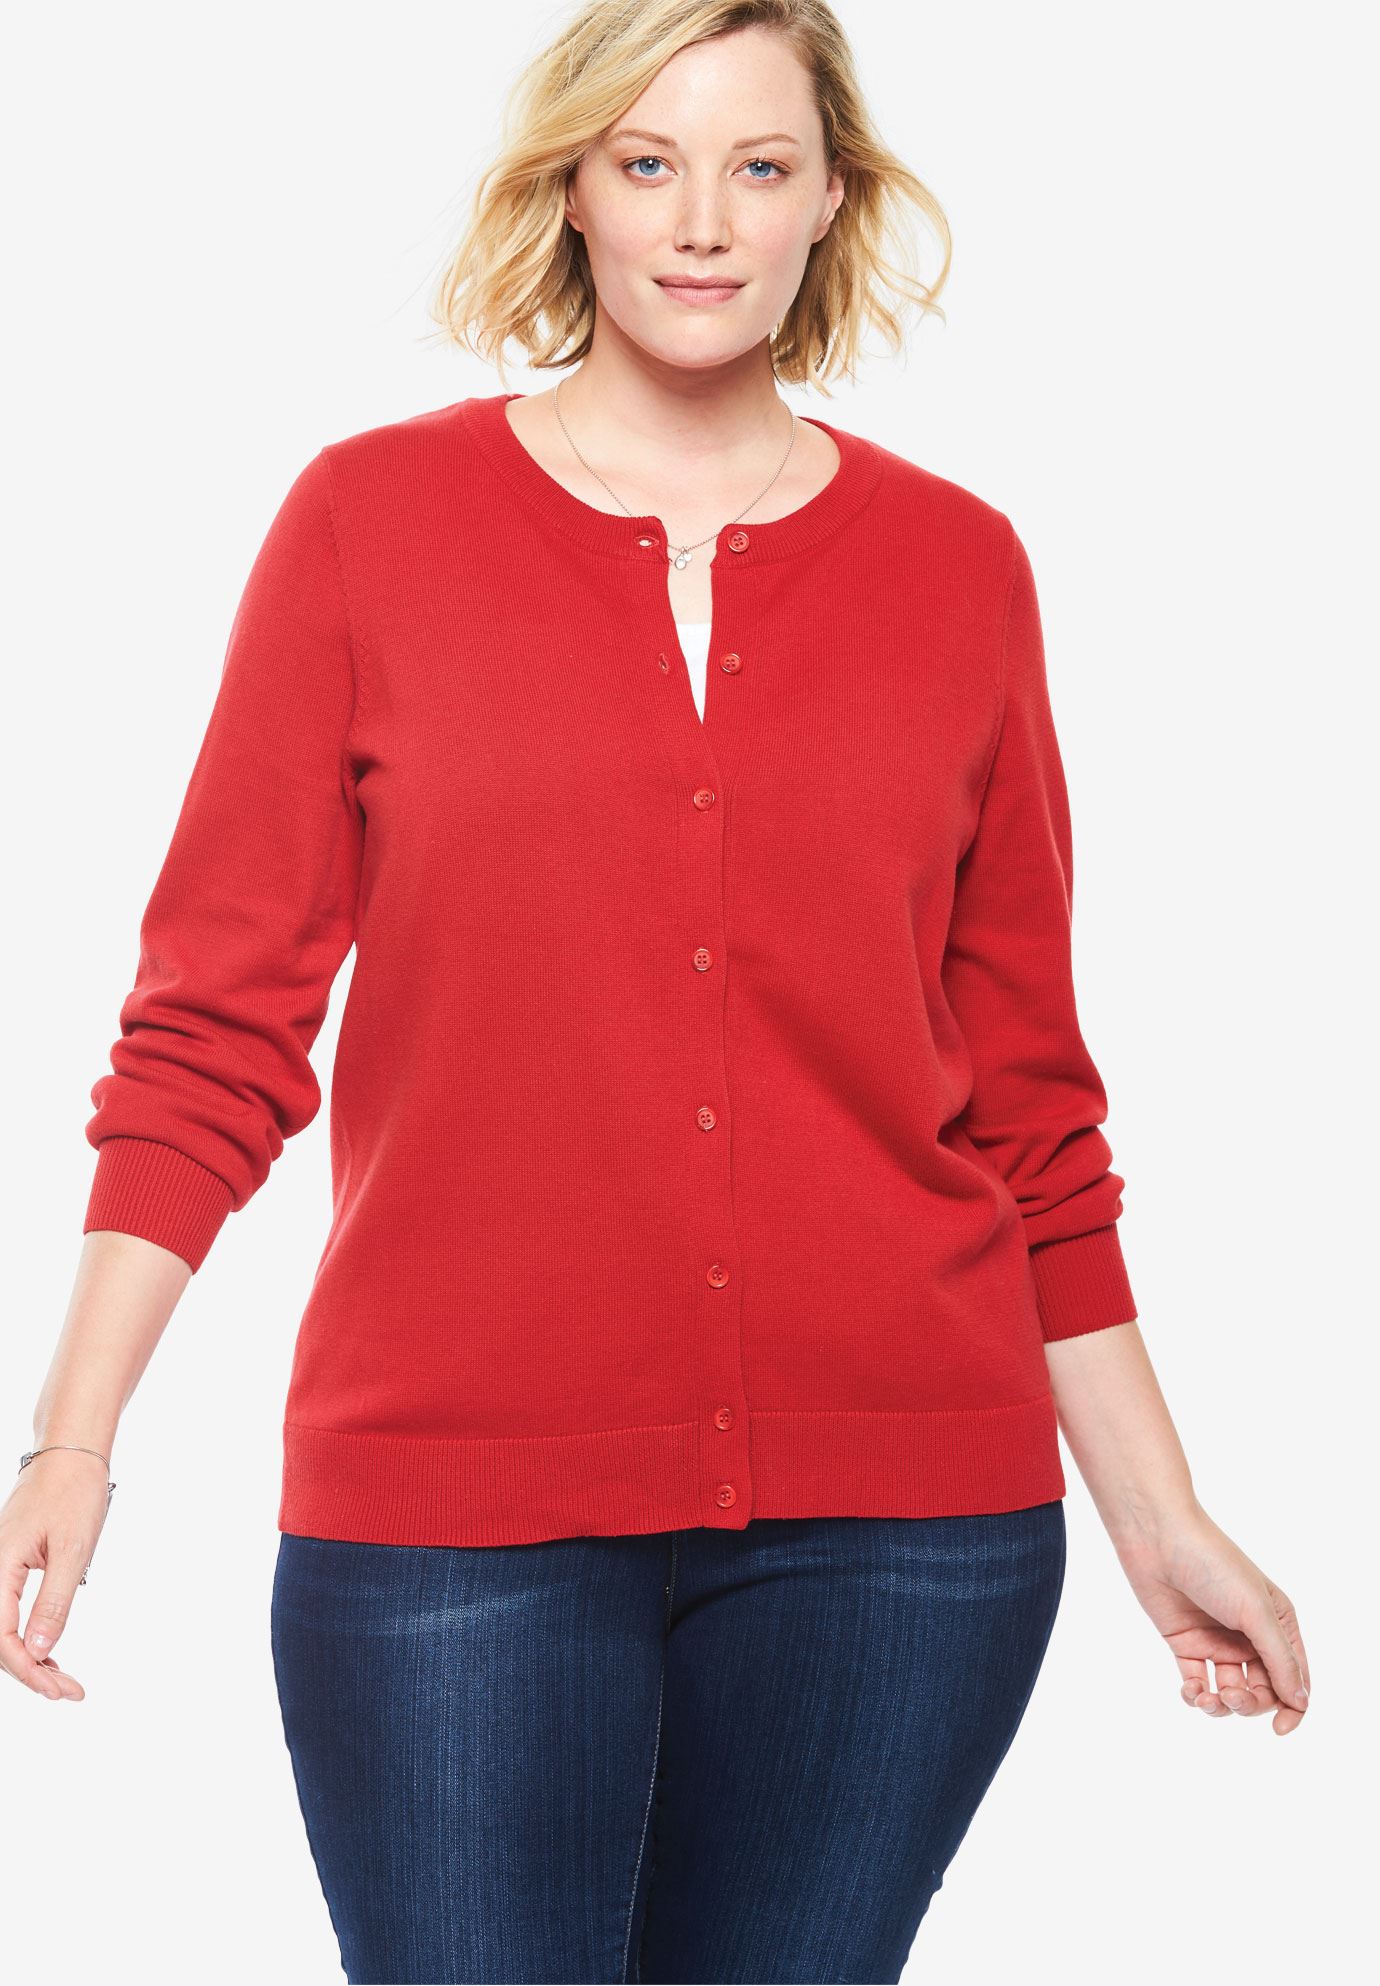 Perfect Elbow-Length Sleeve Cardigan | Plus Size Cardigans | Woman Within